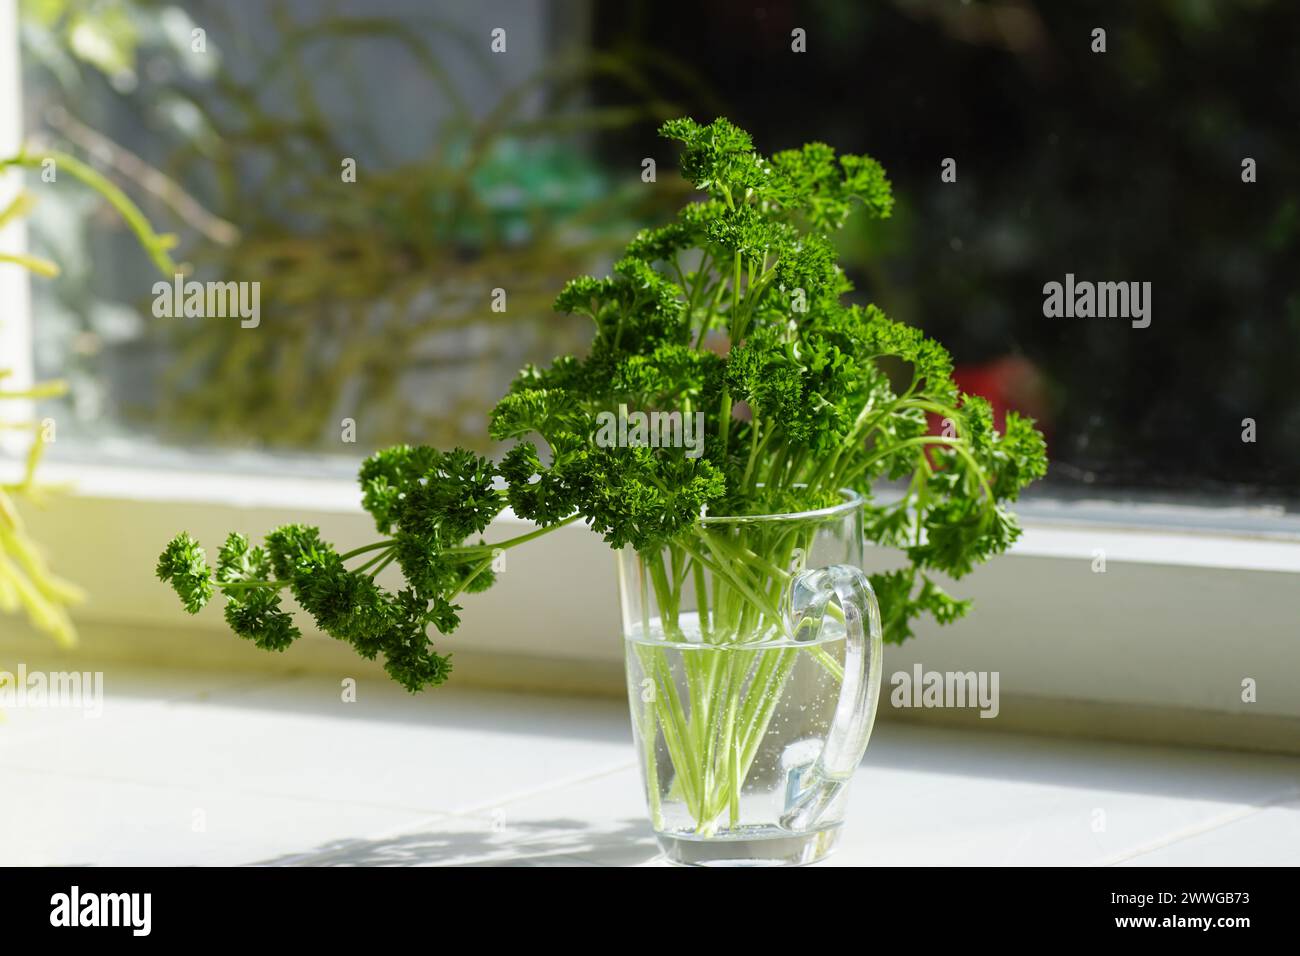 Closeup cut garden parsley, flat leaf parsley plants (Petroselinum crispum), family Apiaceae in a glass cup on a kitchen windowsill. Herb and vegetabl Stock Photo